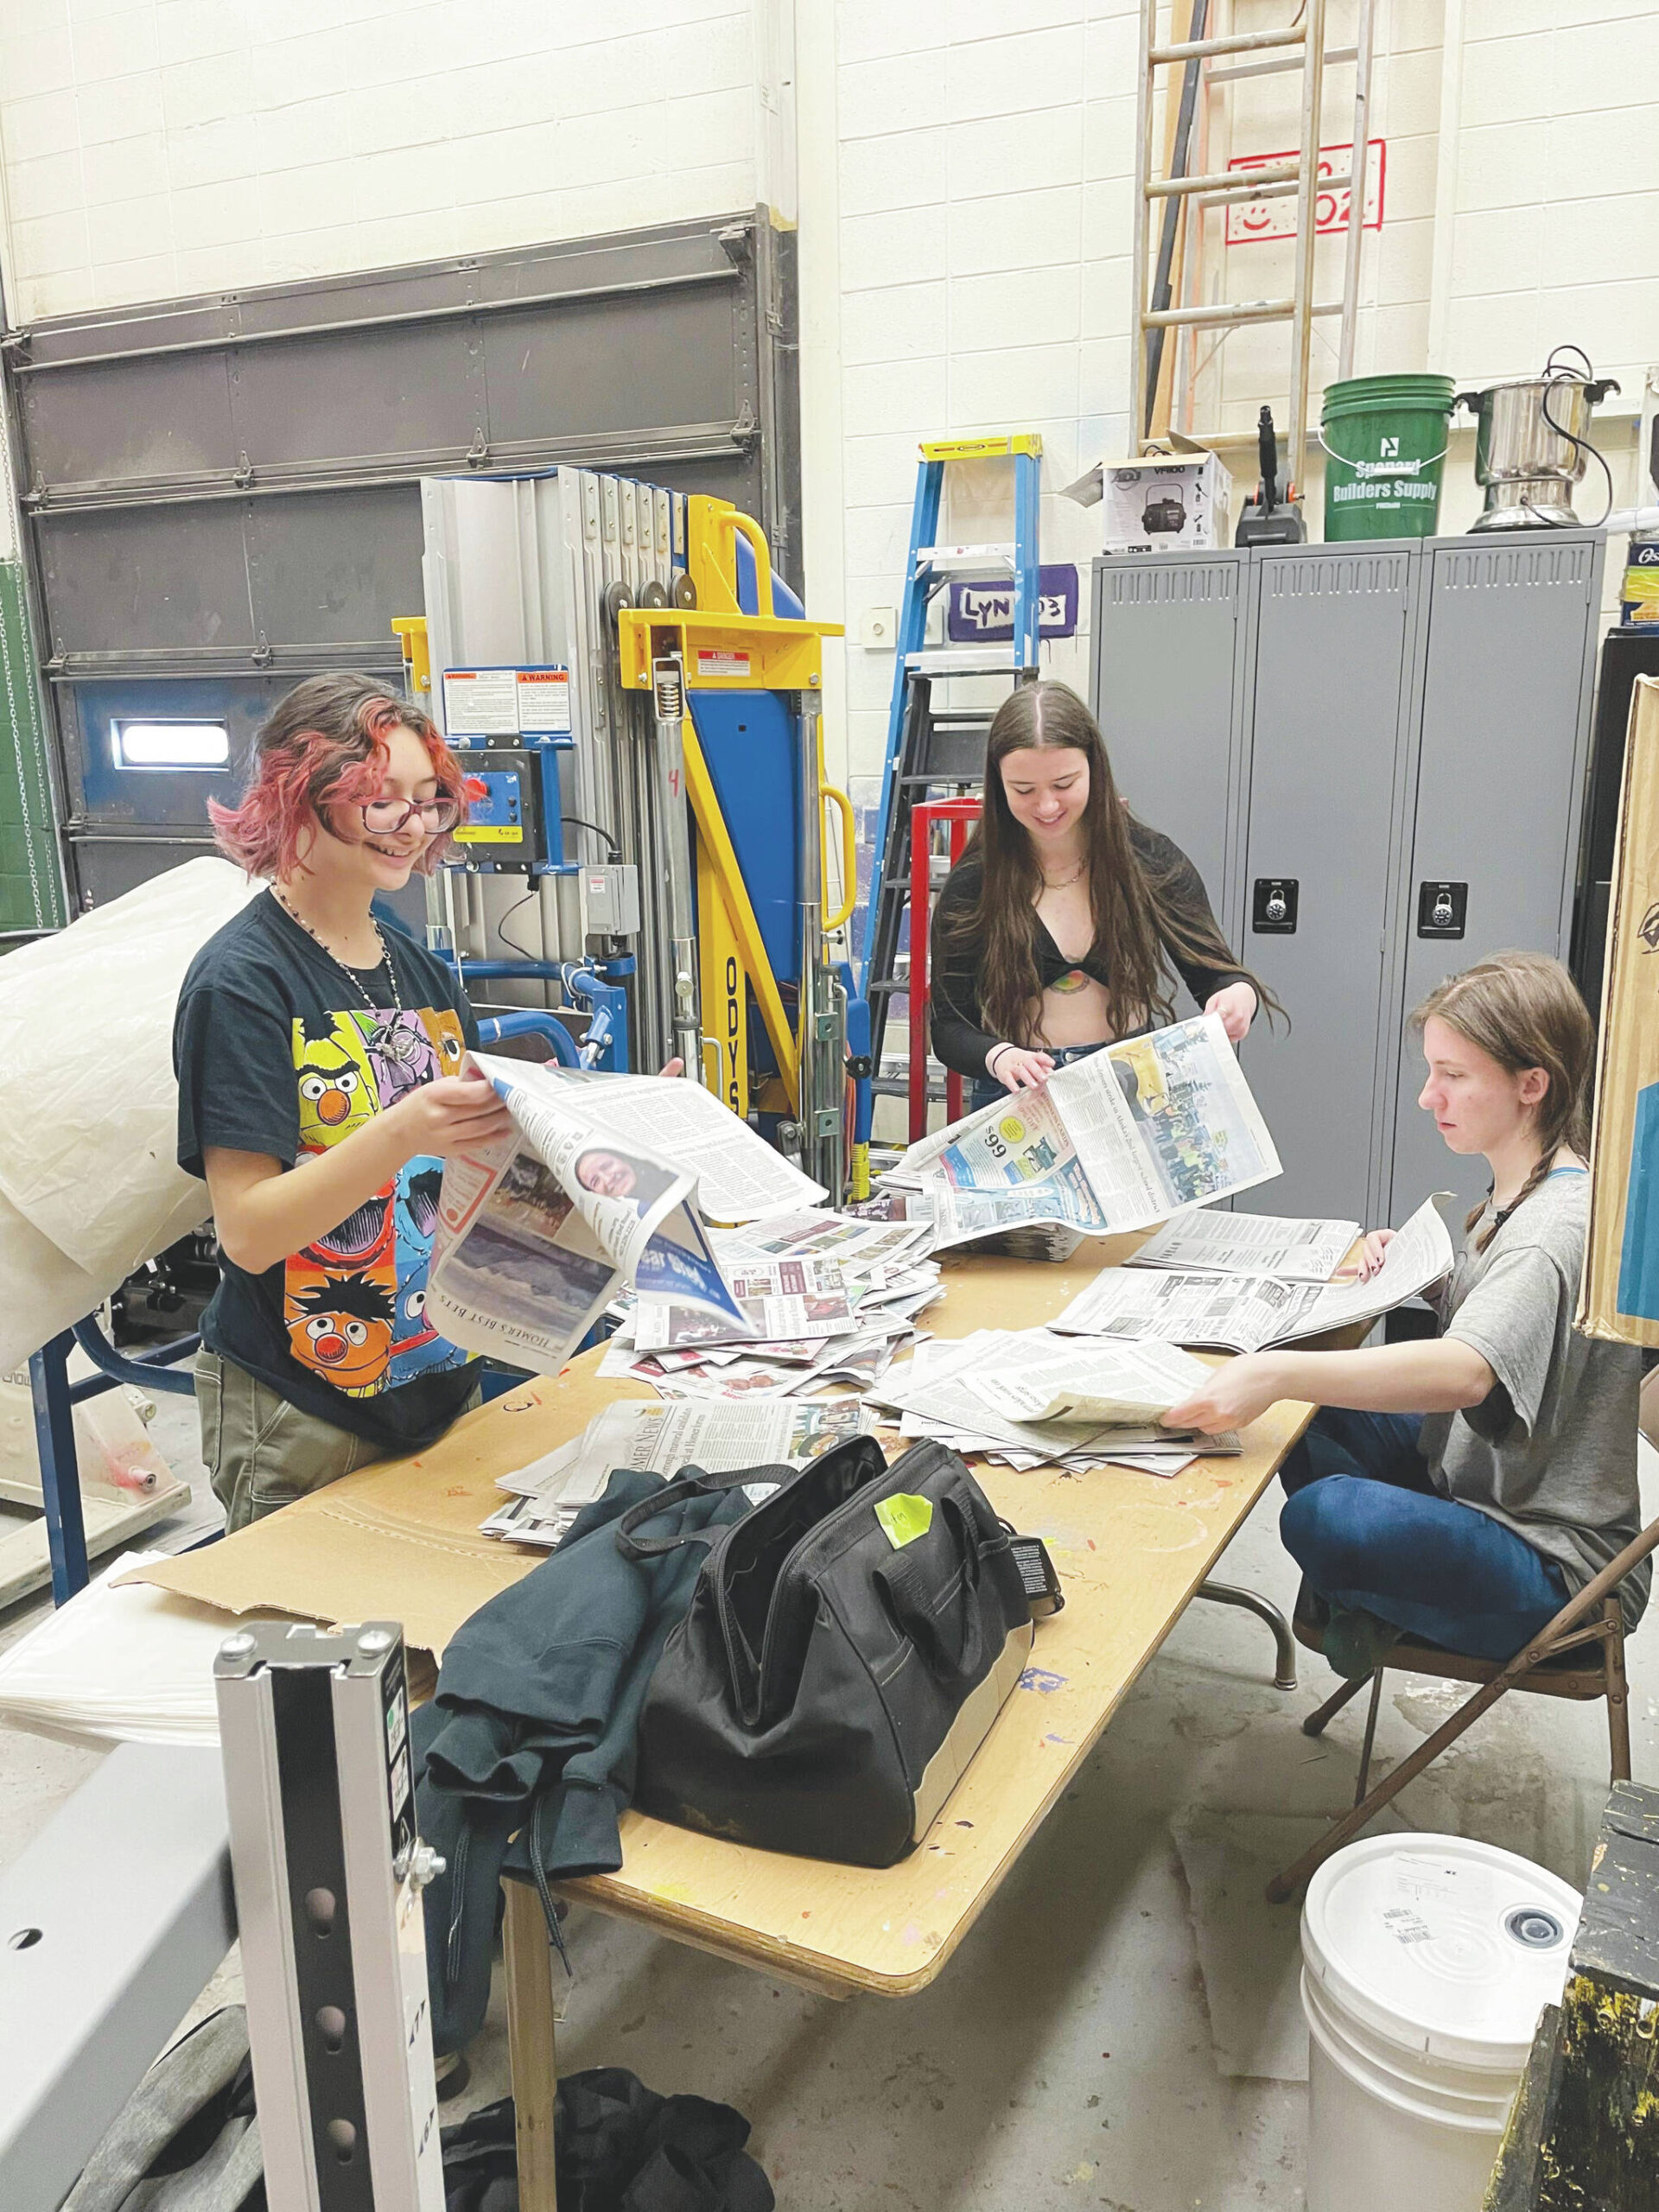 Photo by Emilie Springer/Homer News
Crew Vern Neveras, Bryce Glidden and Jasmine Lurus work in the Homer Mariner Theater shop on March 5, preparing newspaper props for the musical “Newsies.”